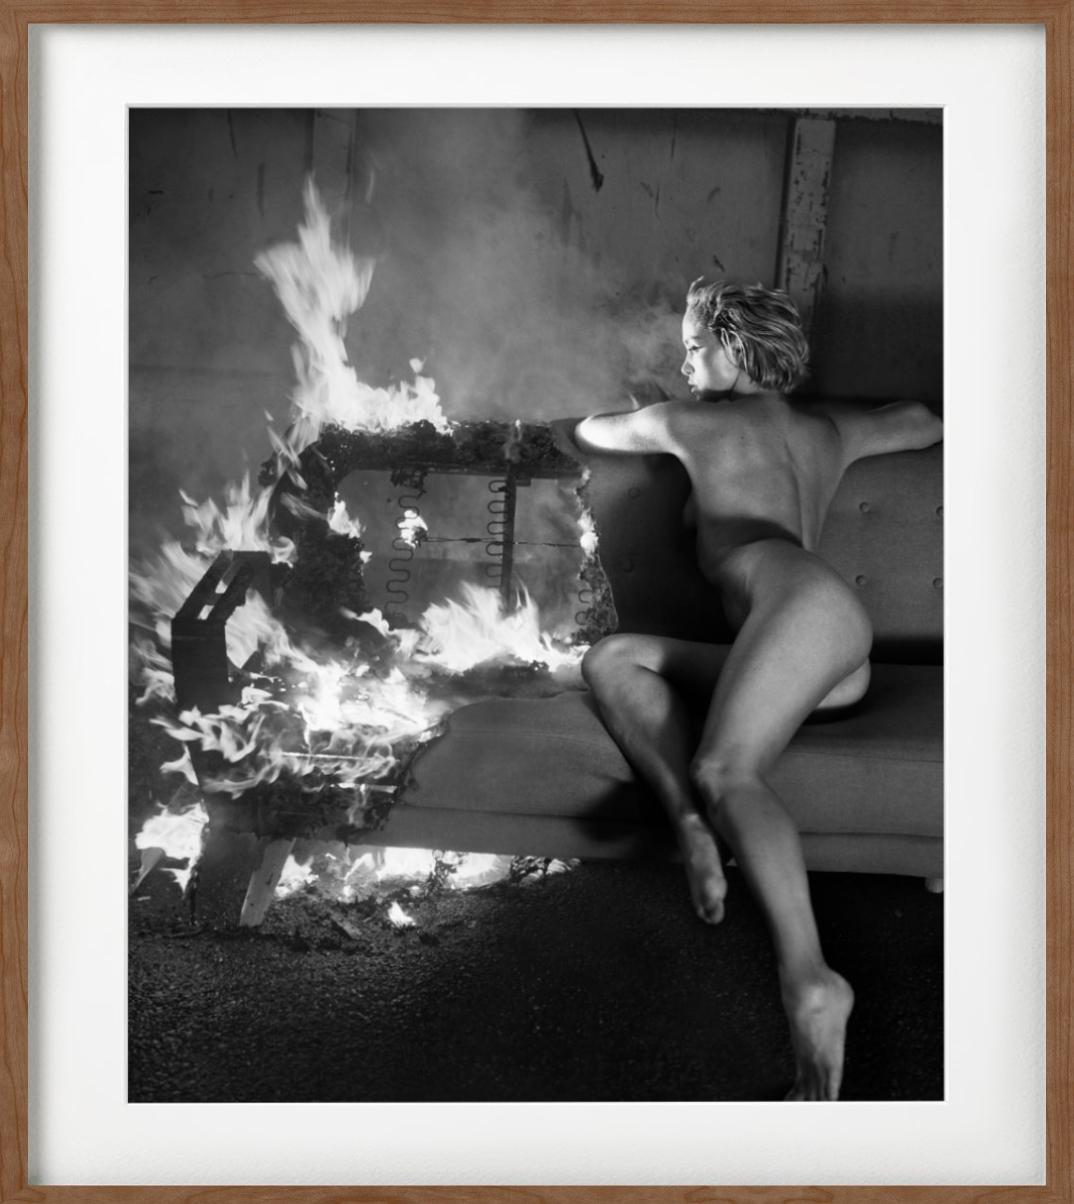 Victoria Fire for Playboy i- b&w photograph nude model sitting on a burning sofa - Black Portrait Photograph by Vincent Peters